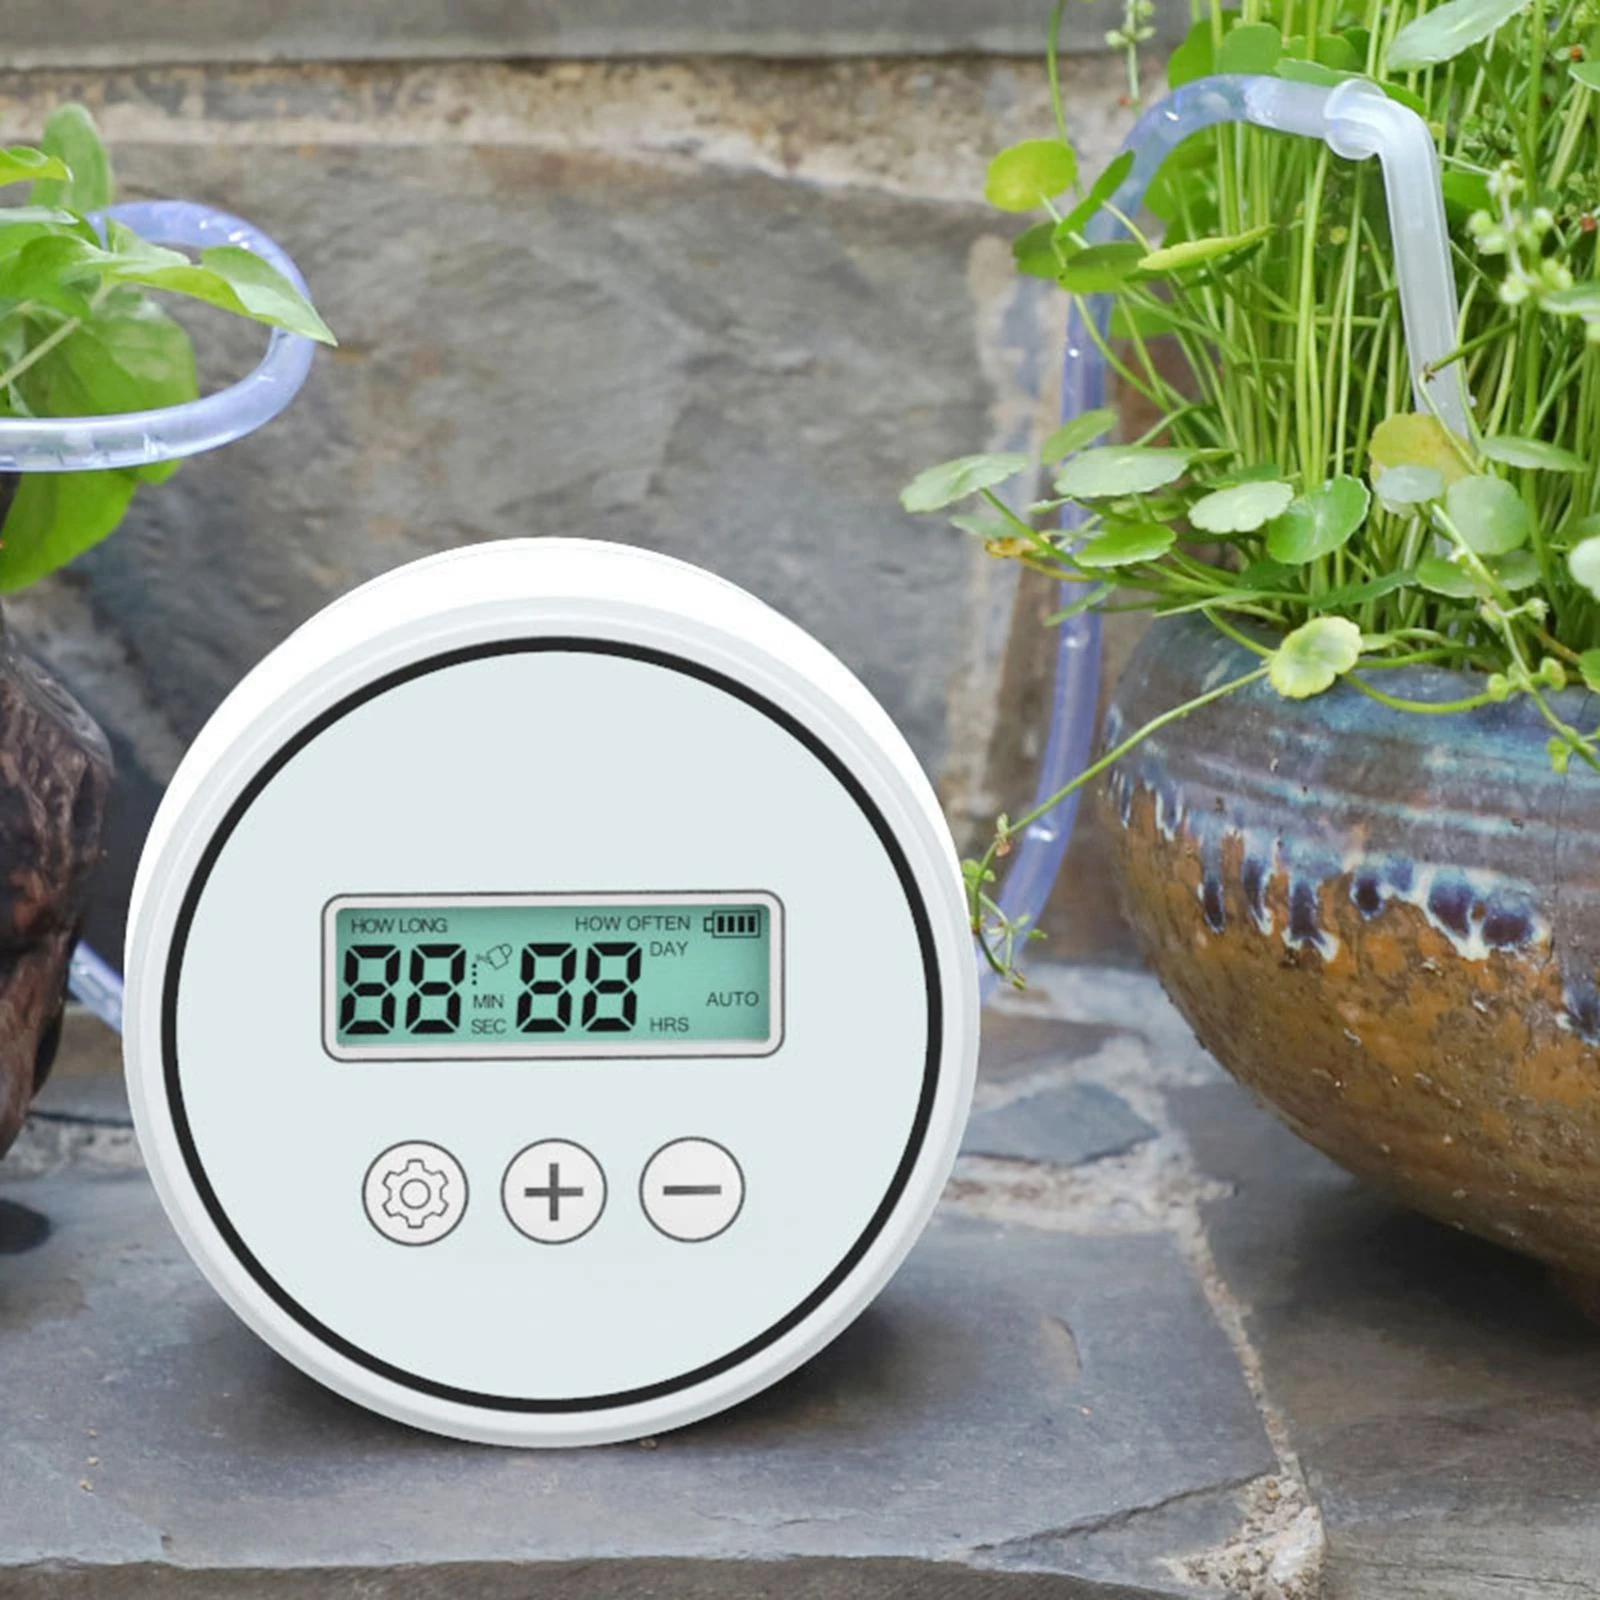 Watering & Irrigation Kits best of sale Wifi Automatic Drip Irrigation Controller Garden Plant Smart Water Pump Timer Indoor Watering Irrigation System Device best drip irrigation kit